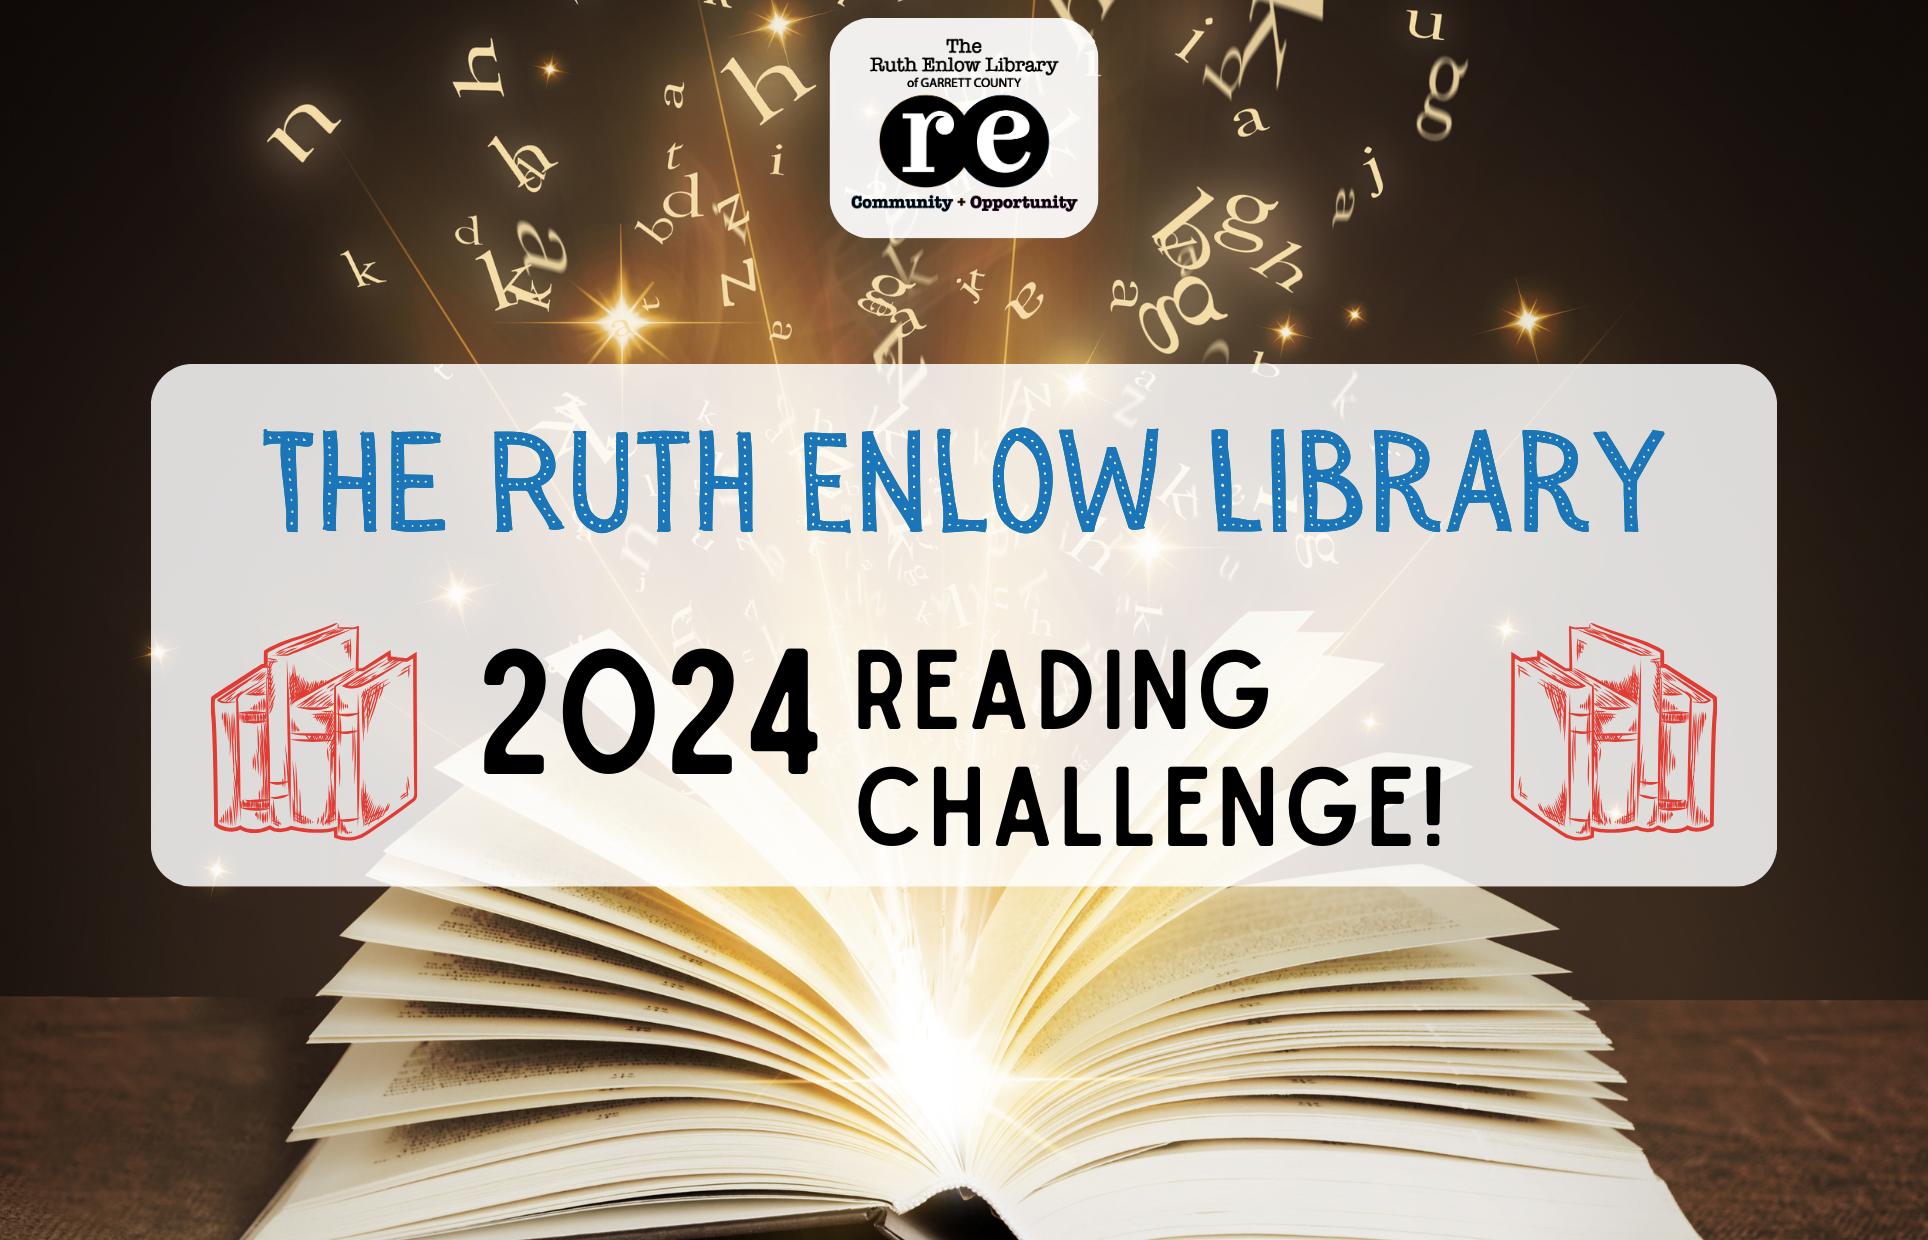 Ruth Enlow Library 2024 Reading Challenge Ruth Enlow Library Of 